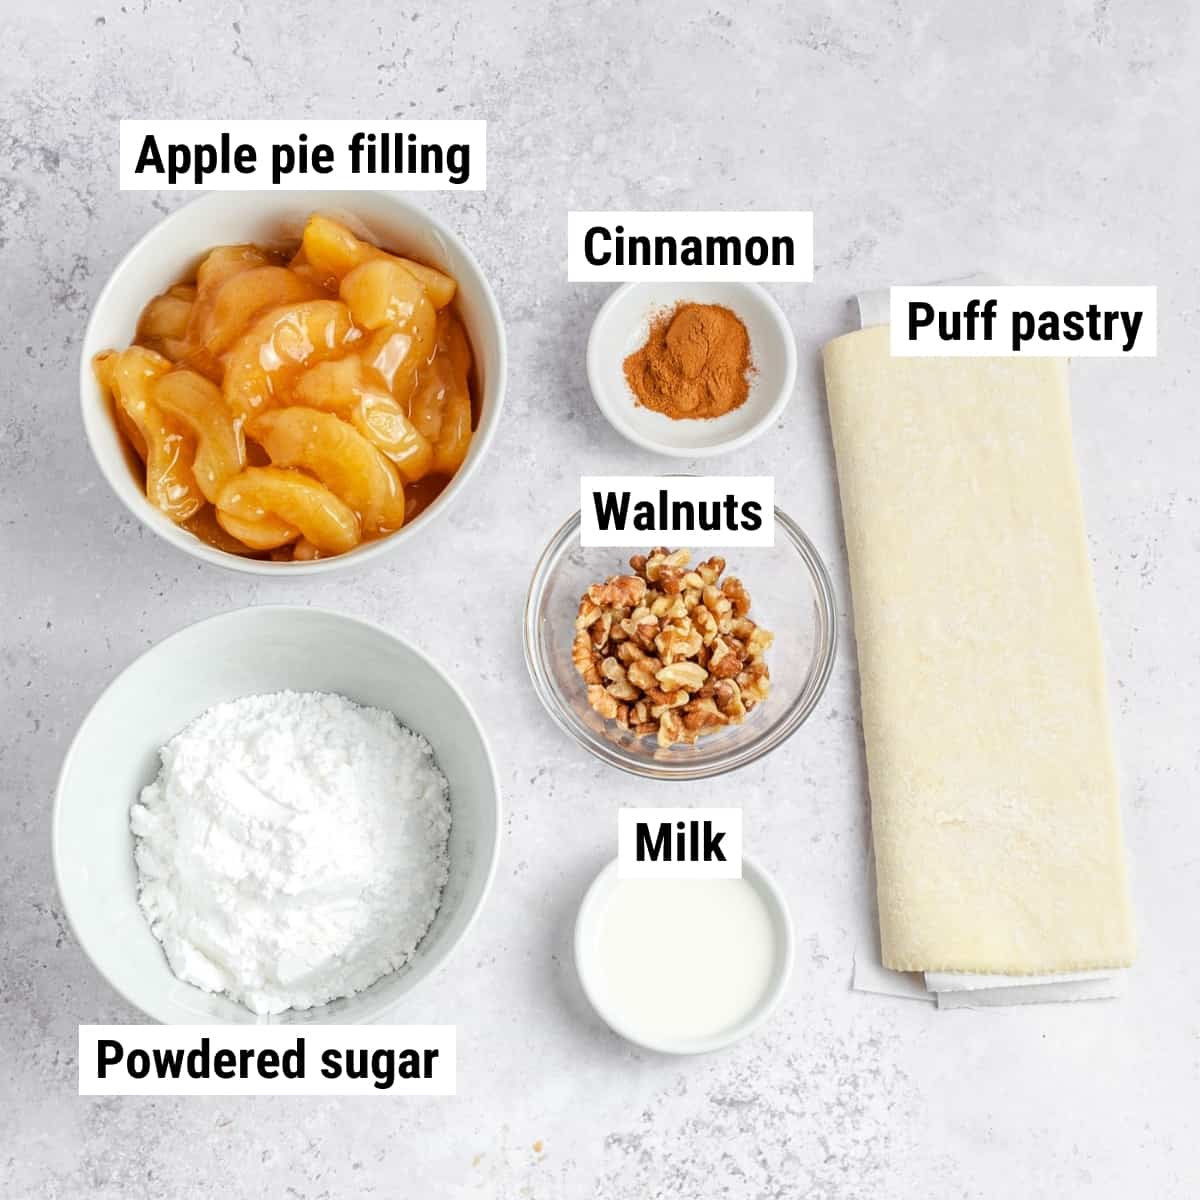 The ingredients used to make apply pie puff pastry spread out on a table.